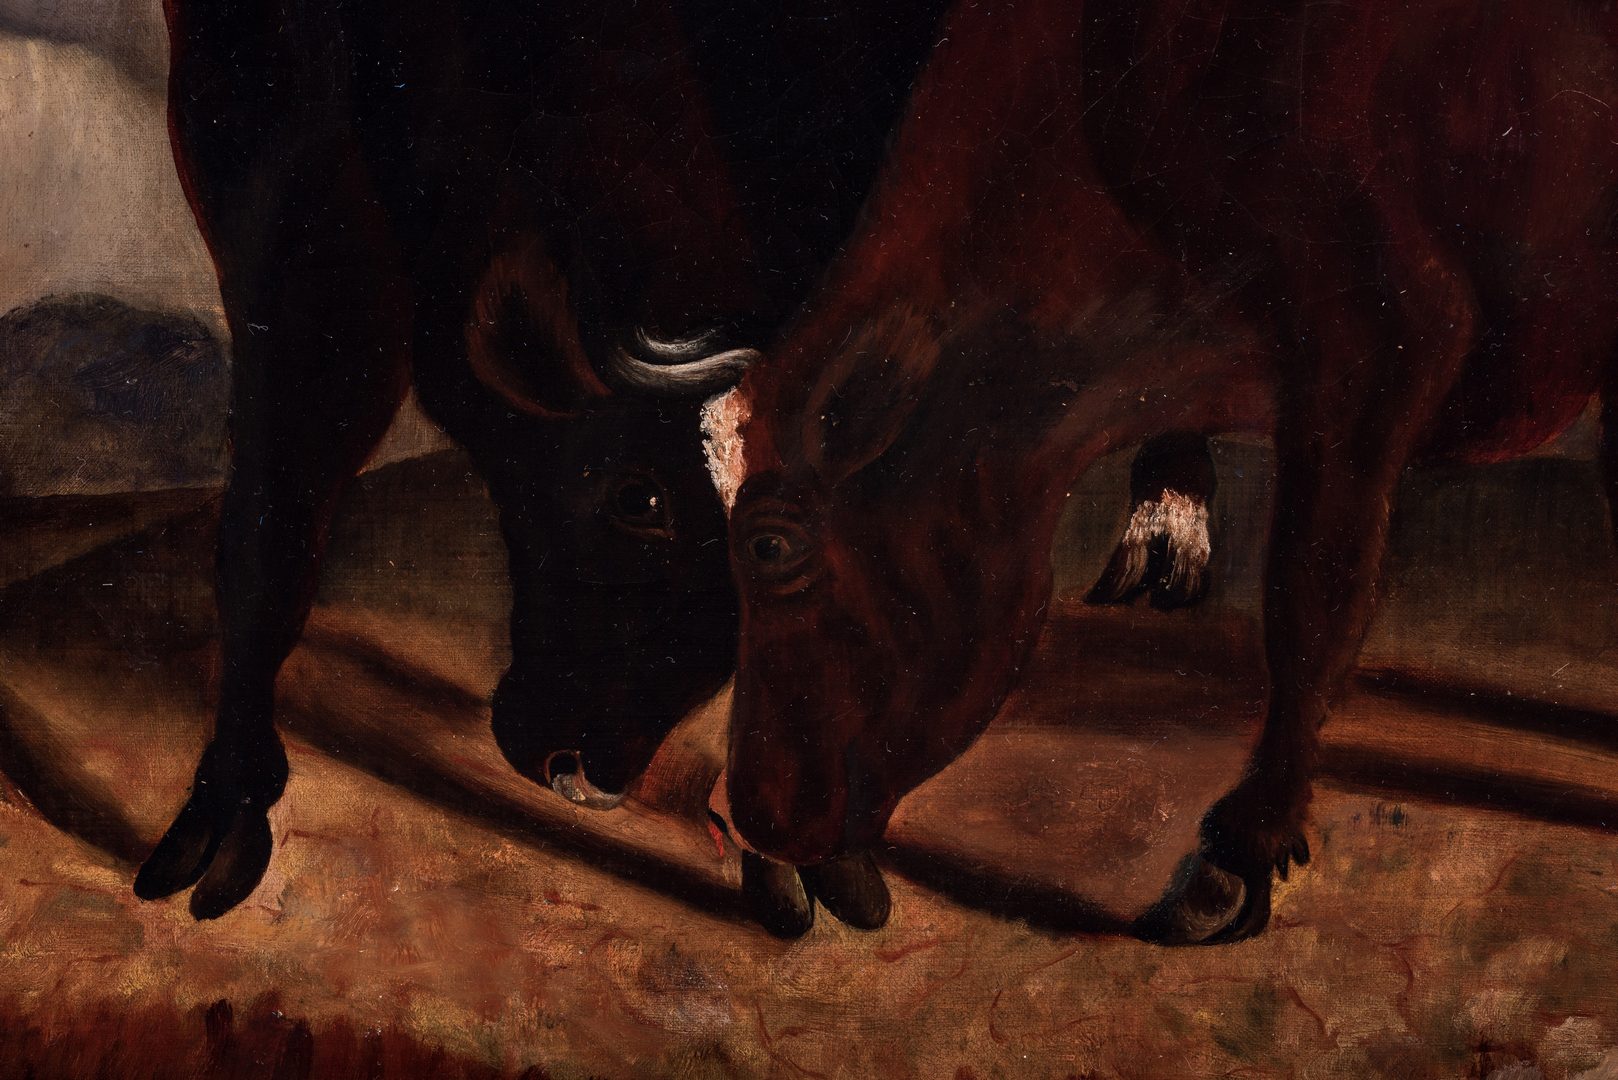 Lot 760: European Oil on Canvas of Bulls by Stream